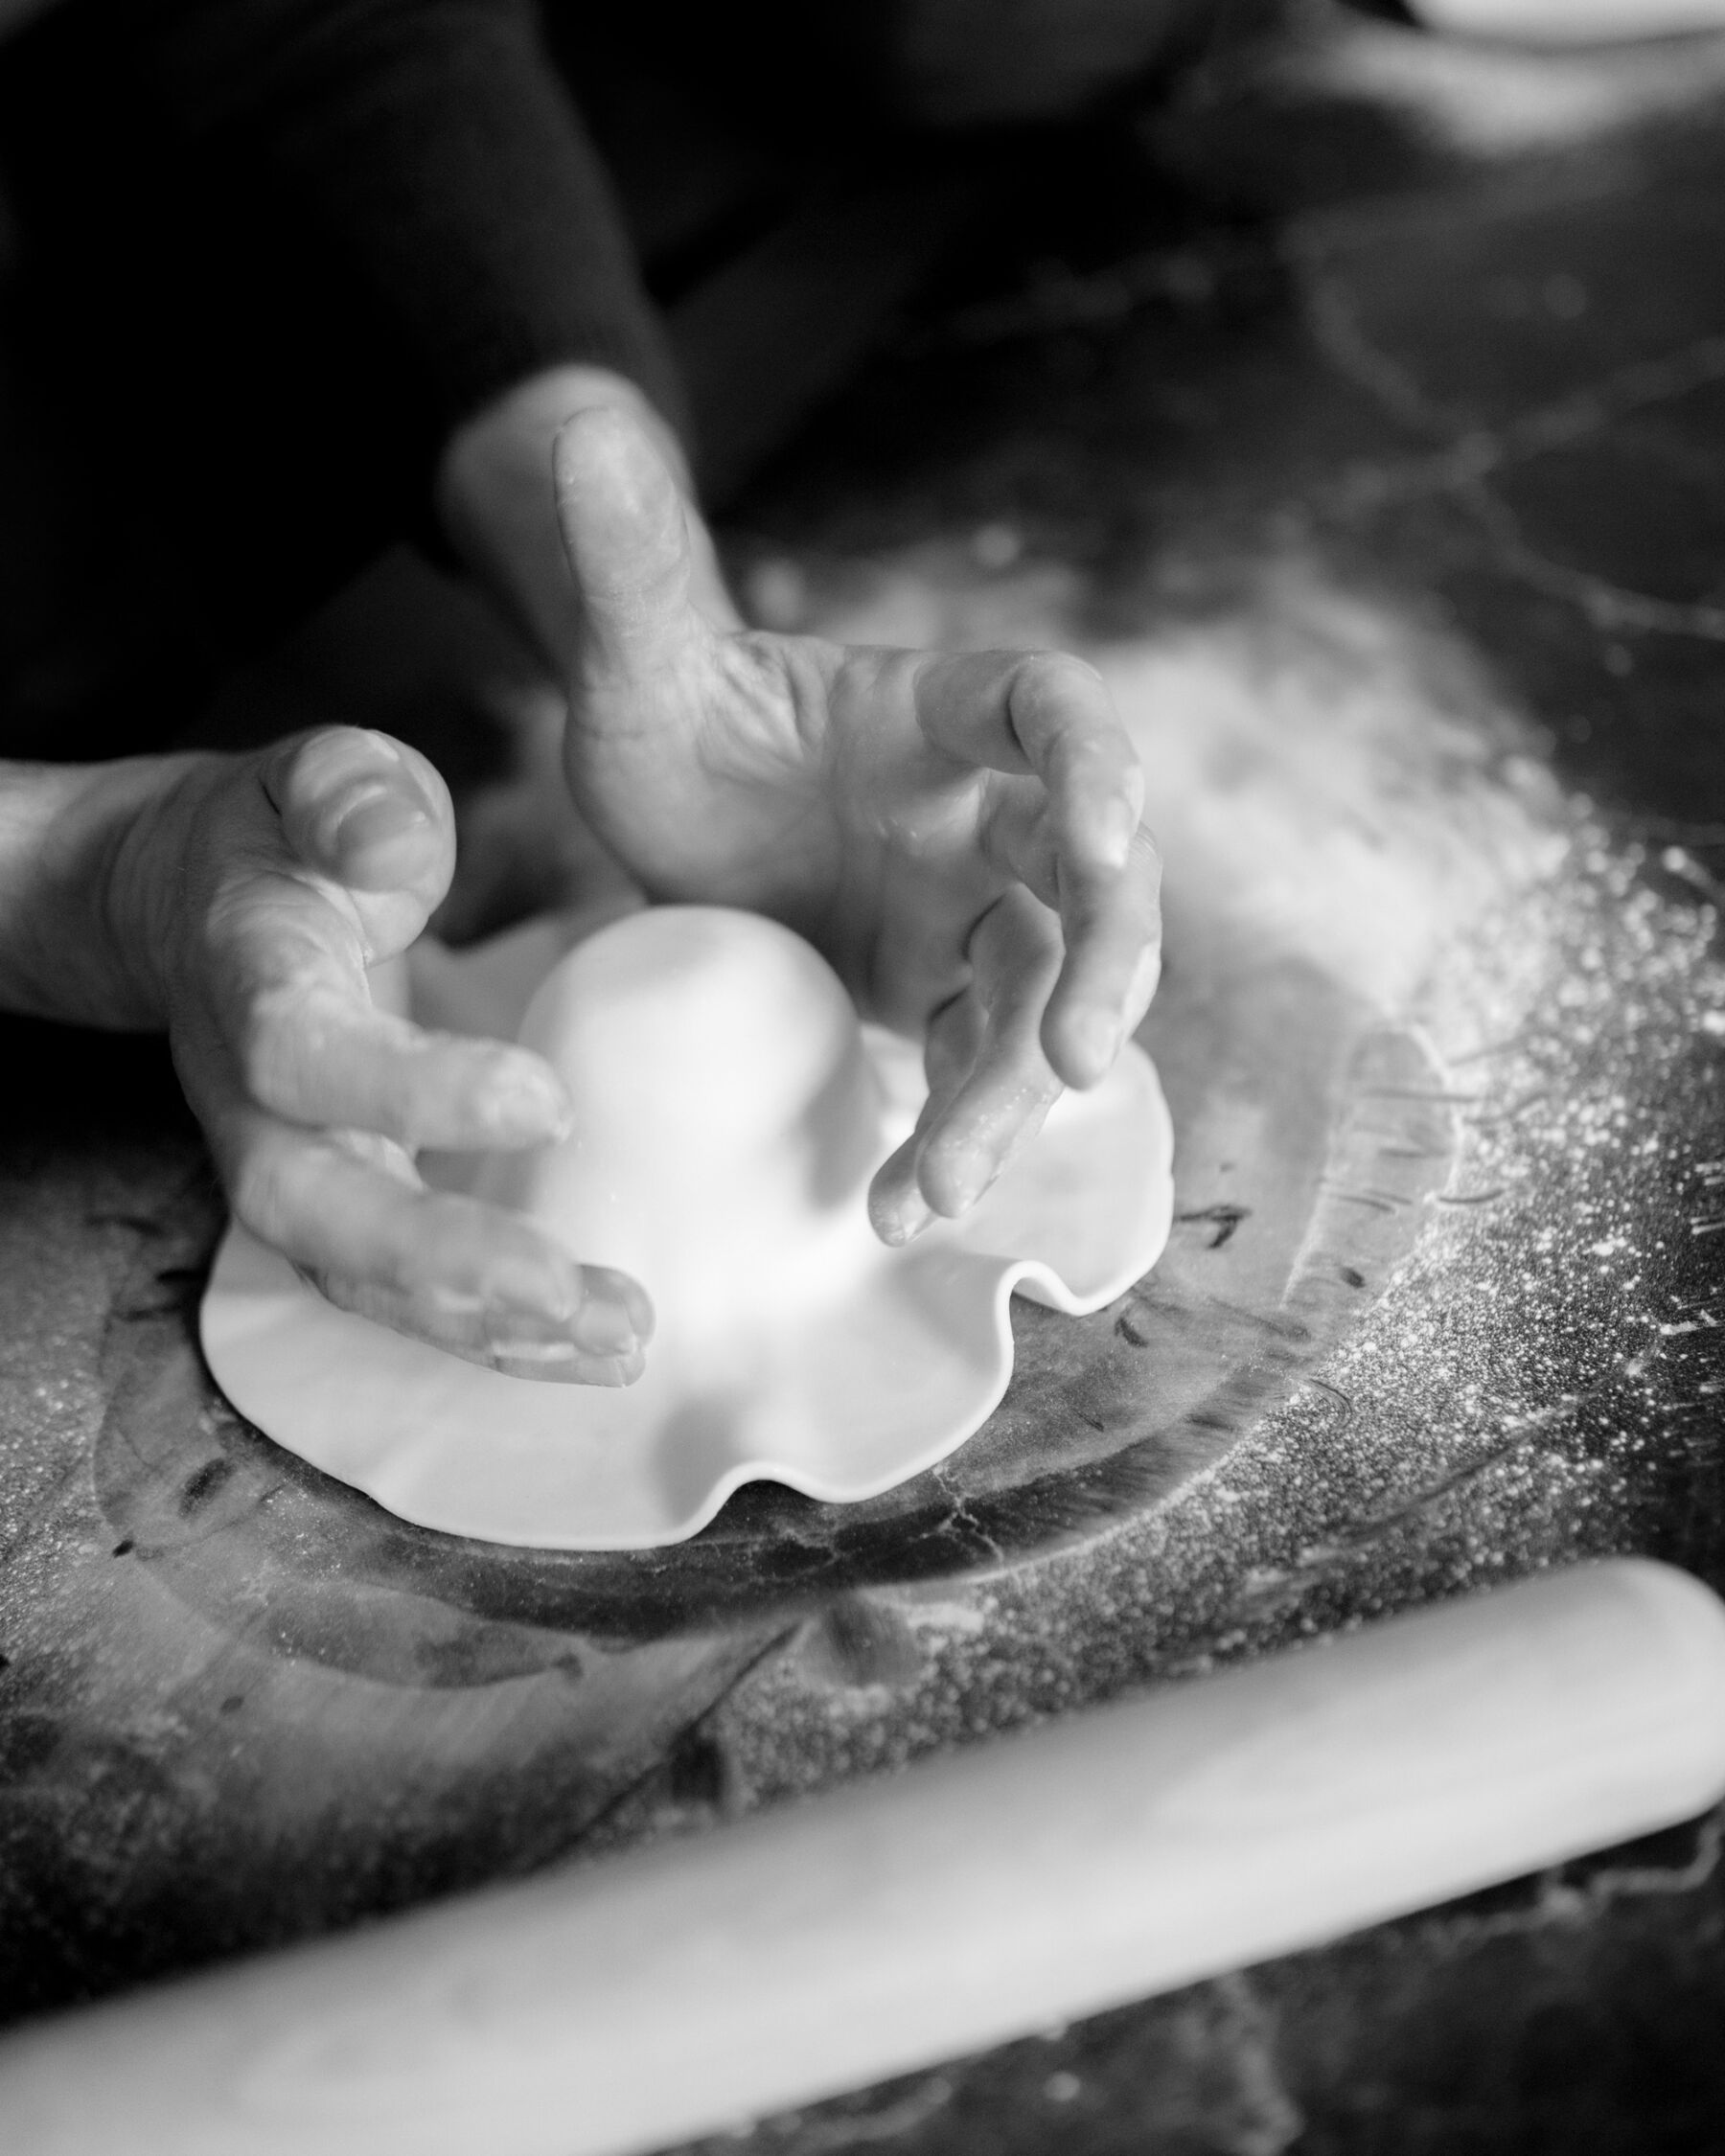 Hands working with  pastry.